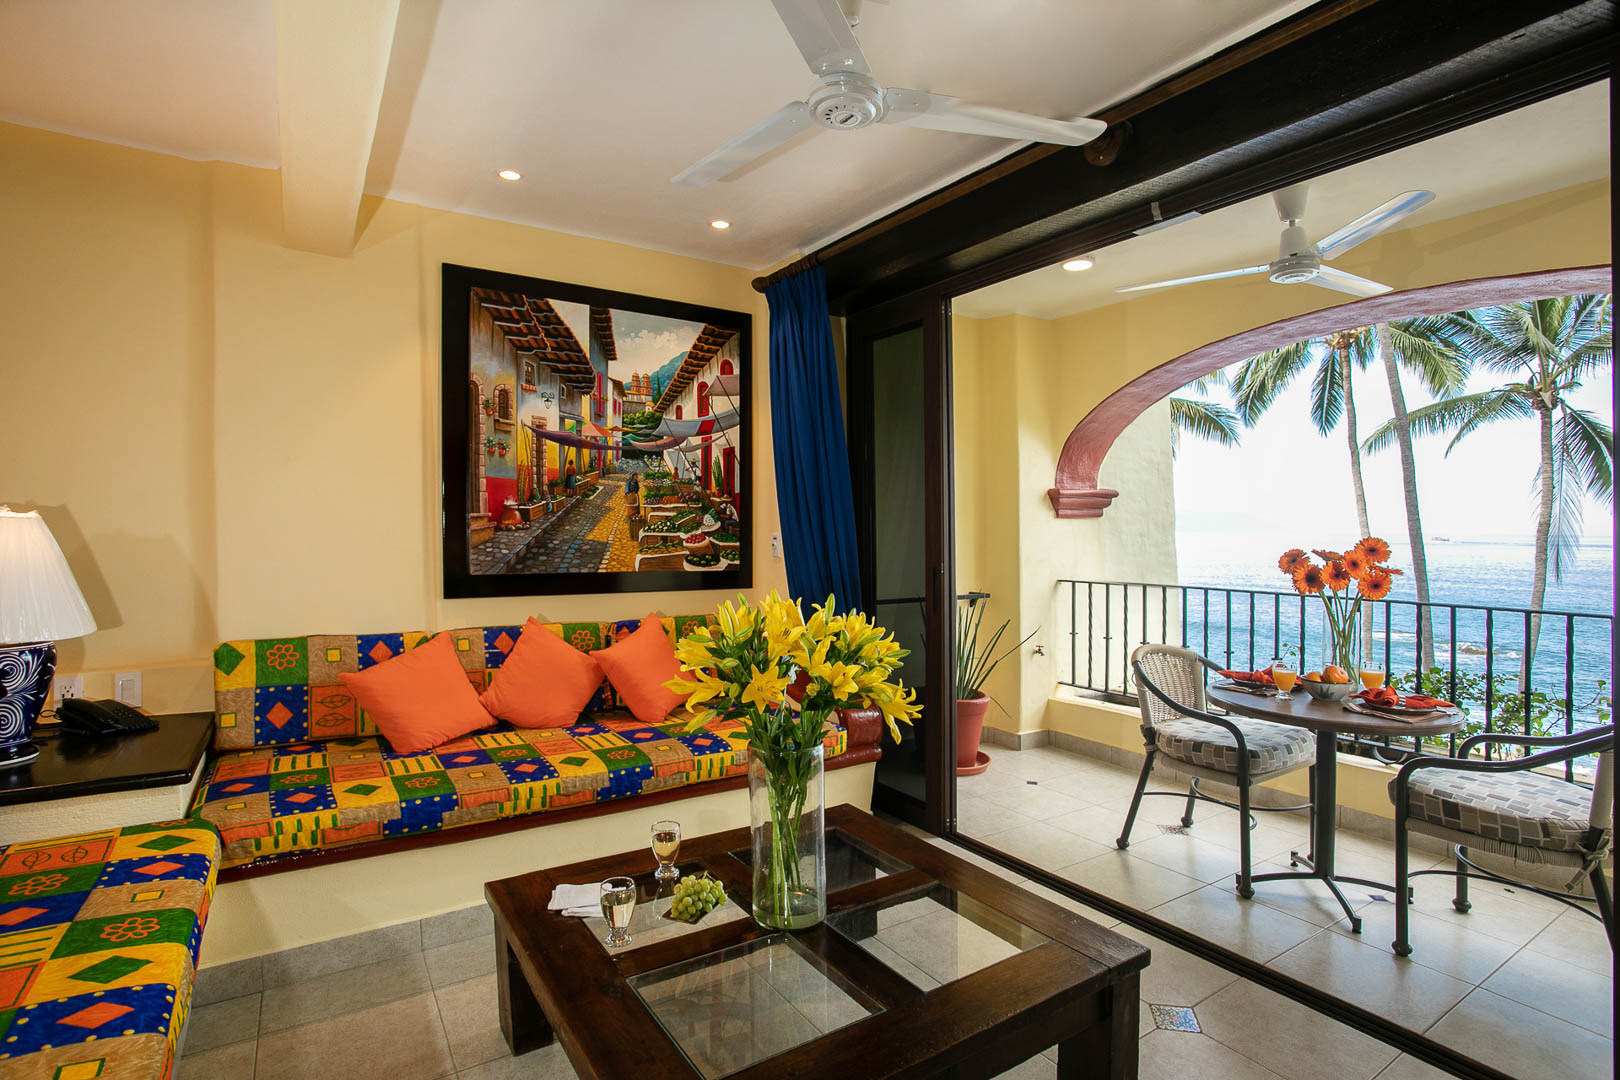 An airy living room, with a balcony overlooking the ocean at TPI's Lindo Mar Resort in Puerto Vallarta, Mexico.